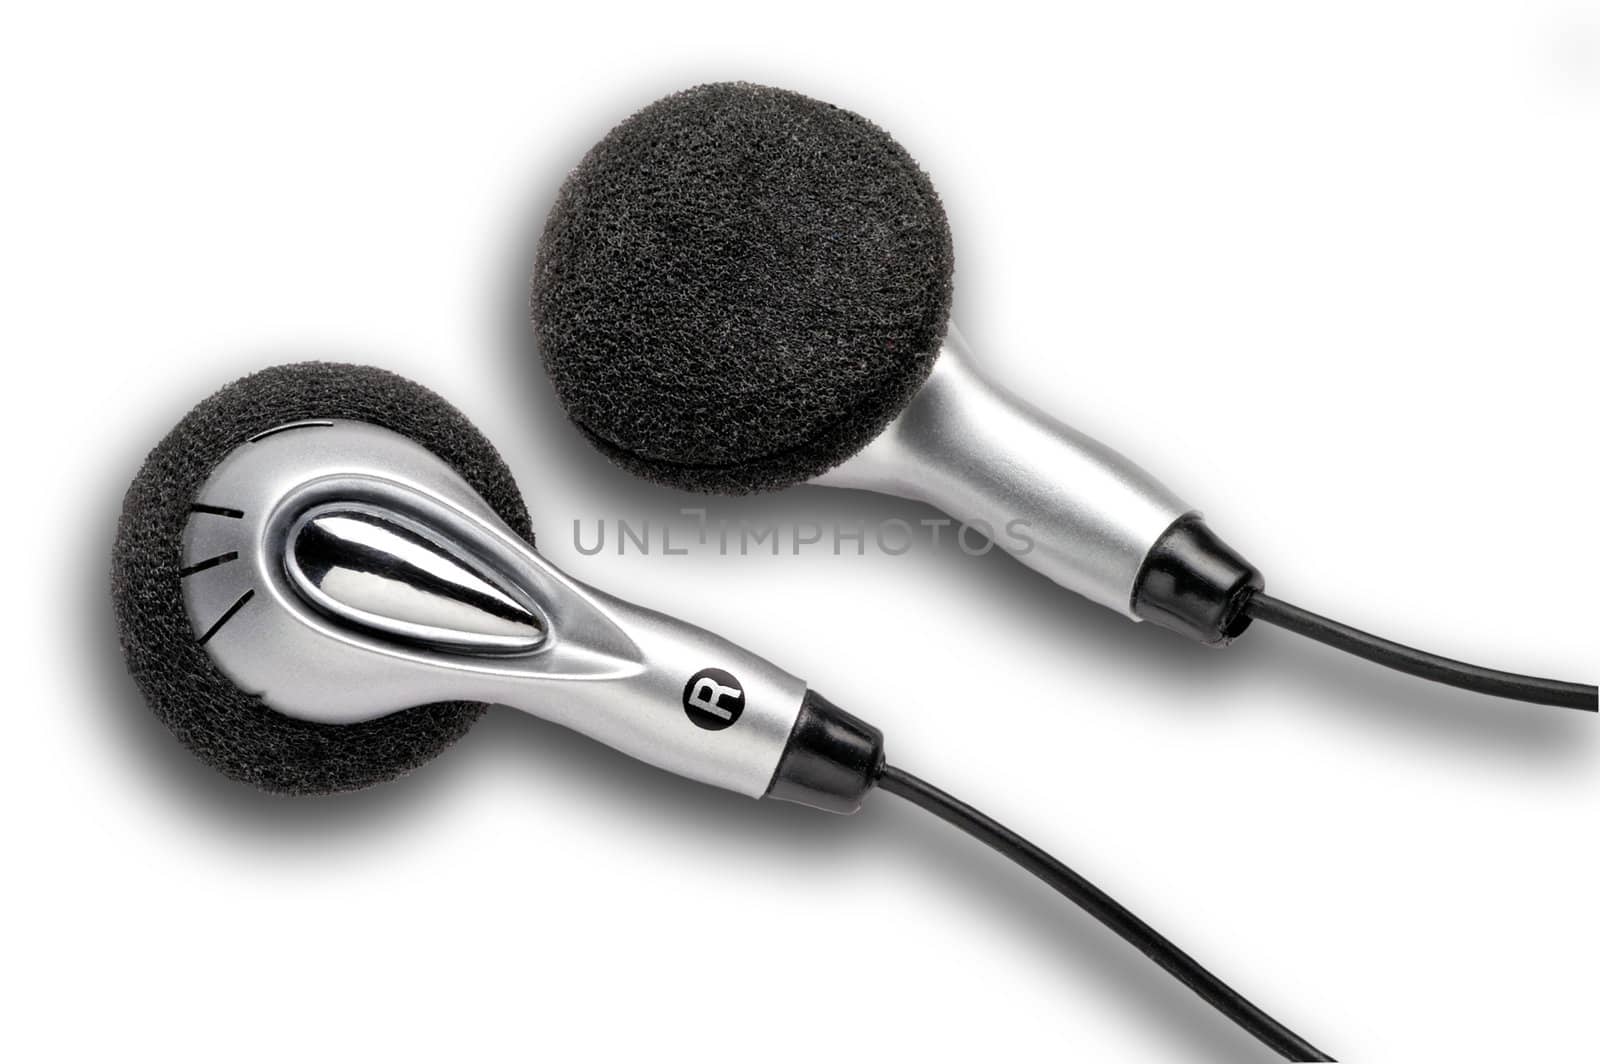 Earphones with clipping path